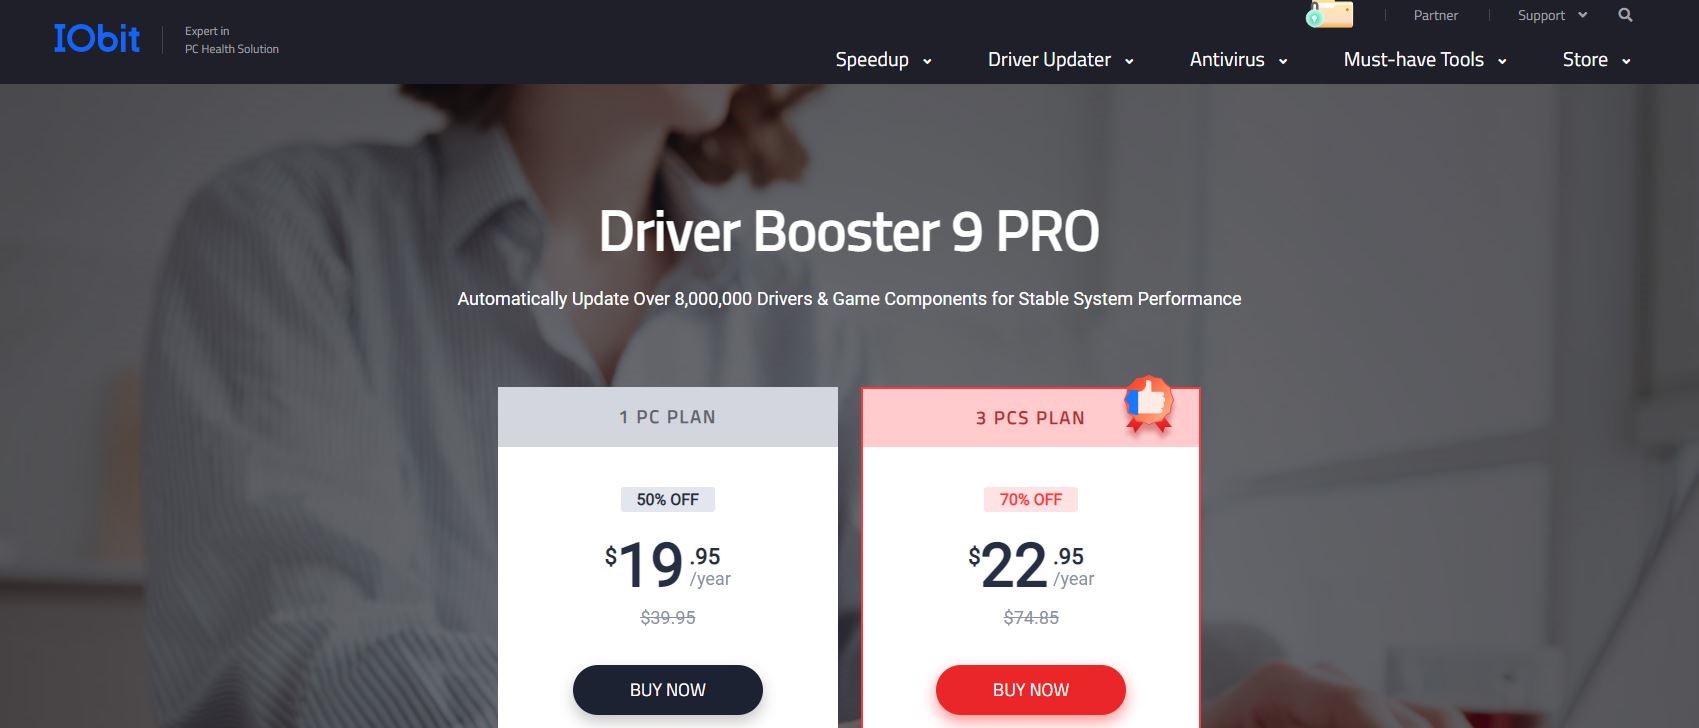 How to Use Driver Booster Driver Updater 